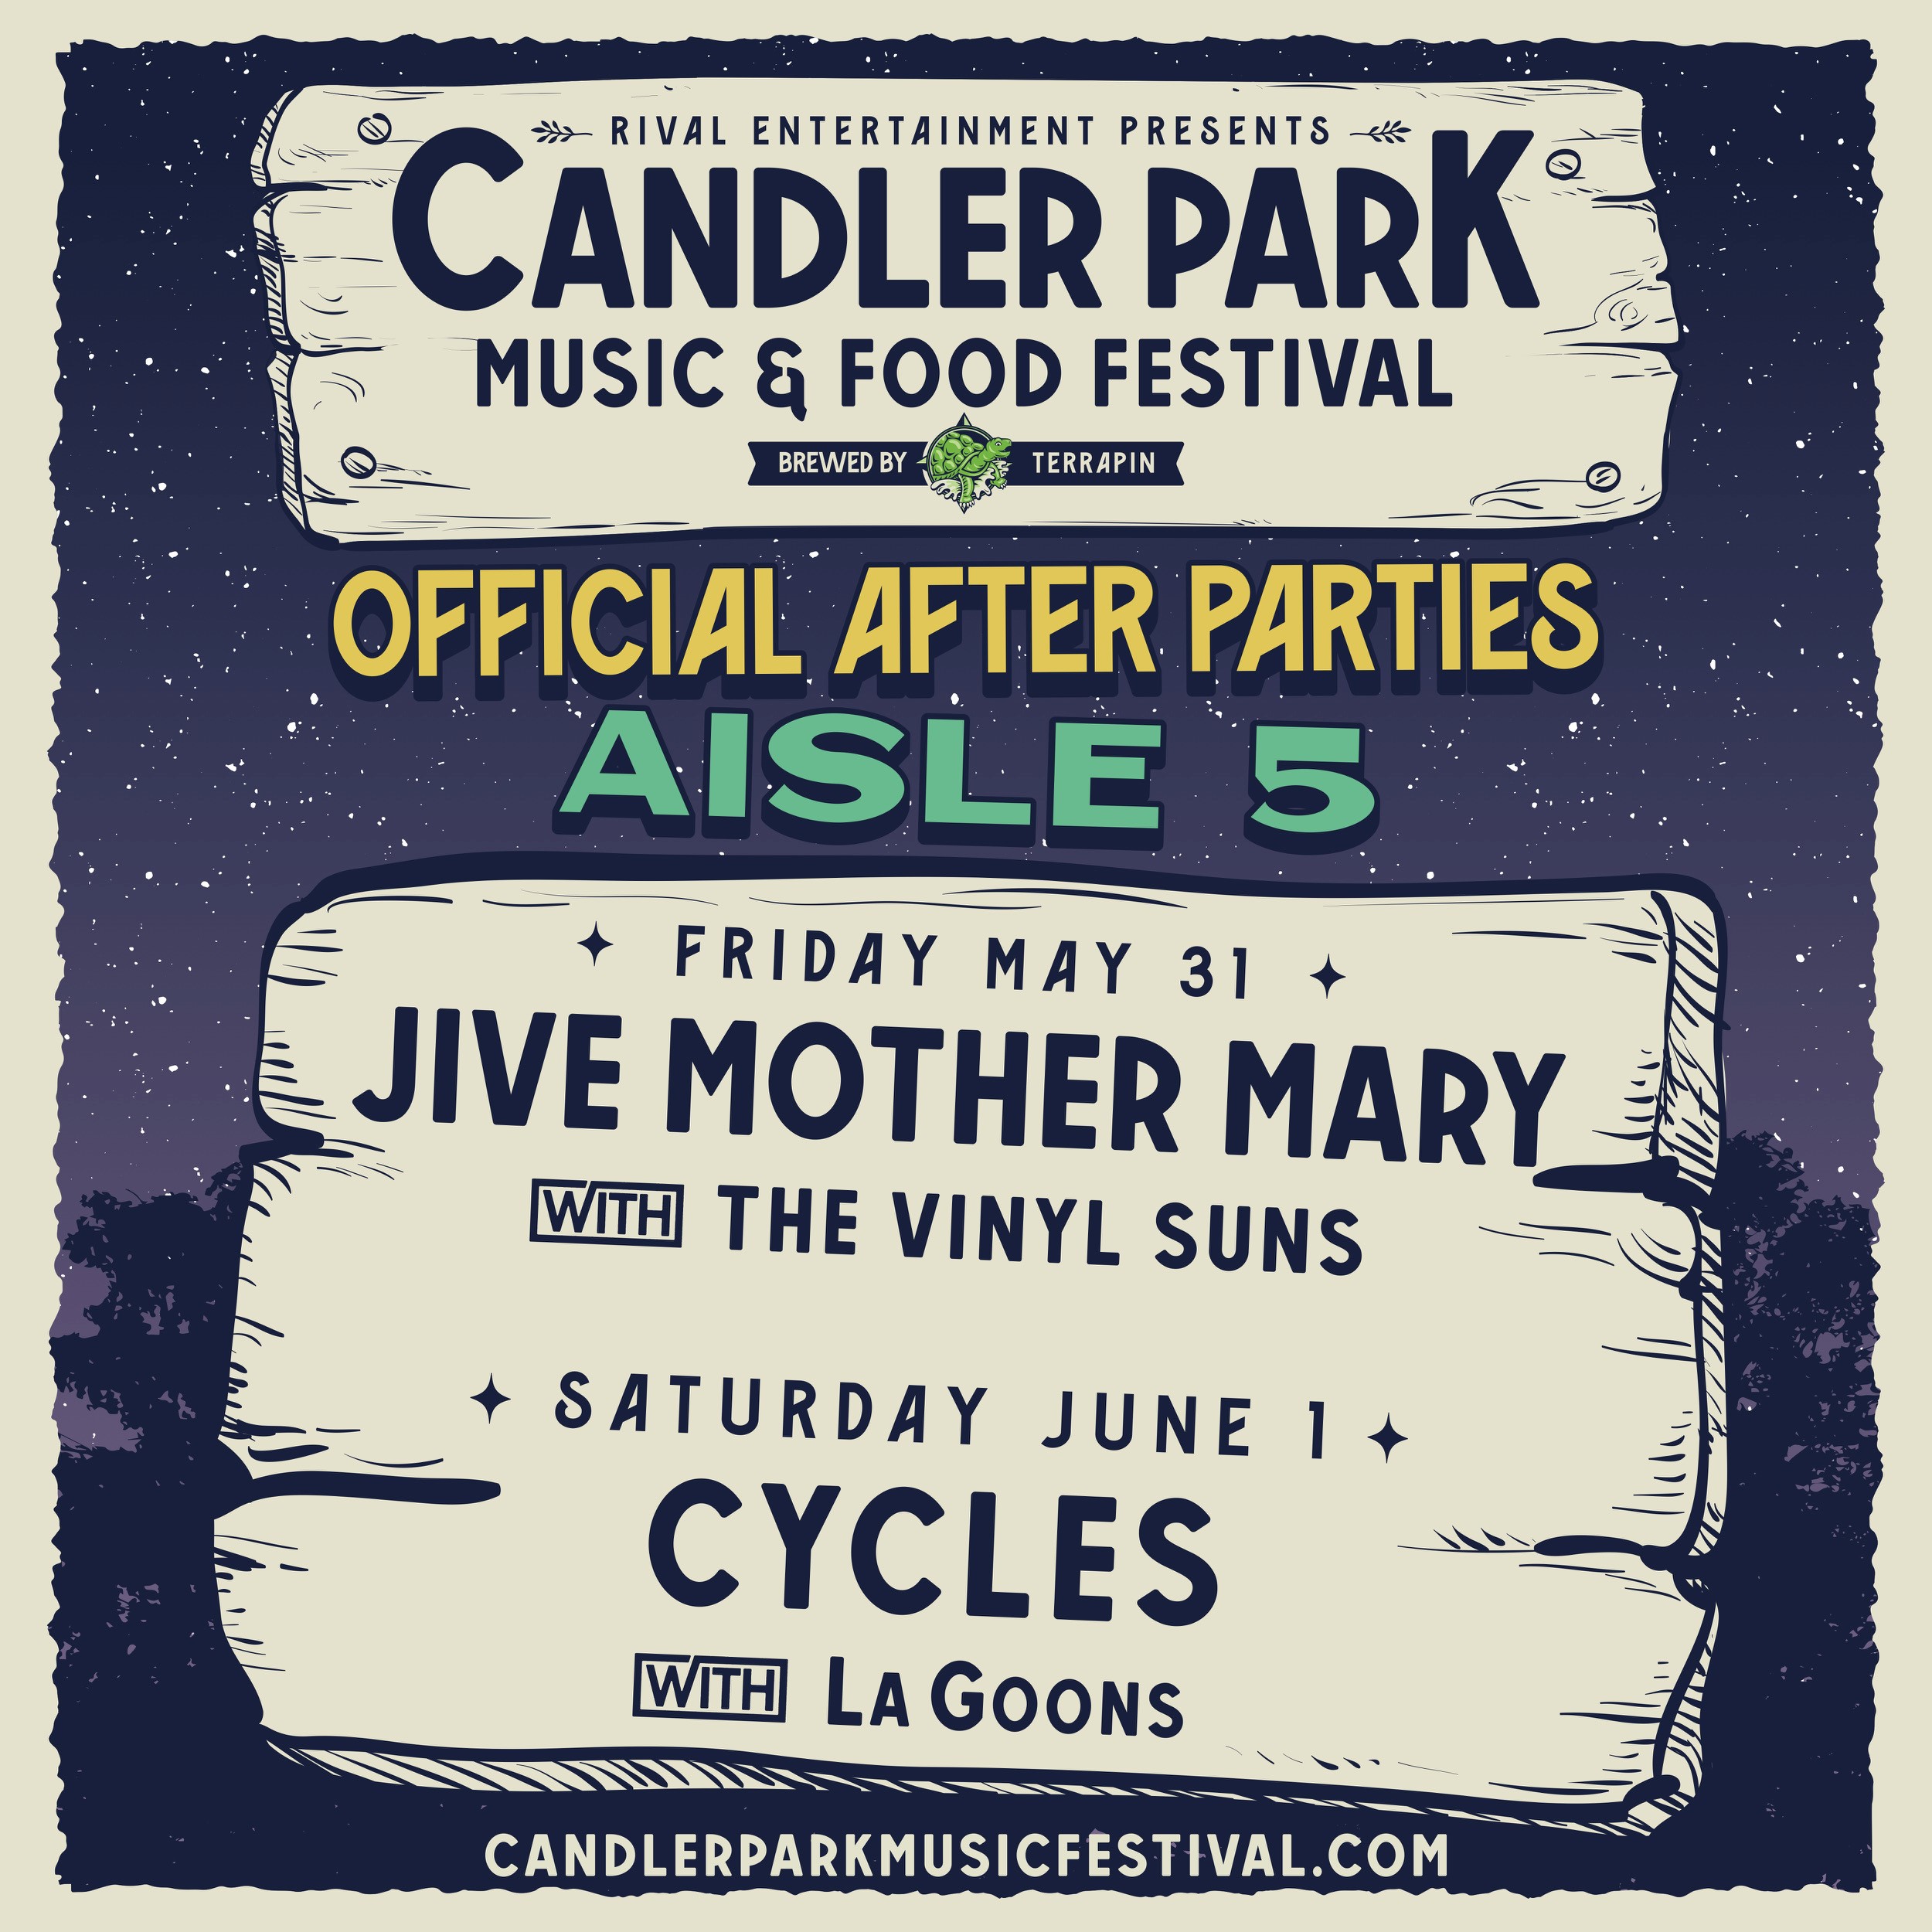 Candler Park Music & Food Festival Official After Parties, Fulton, Georgia, United States